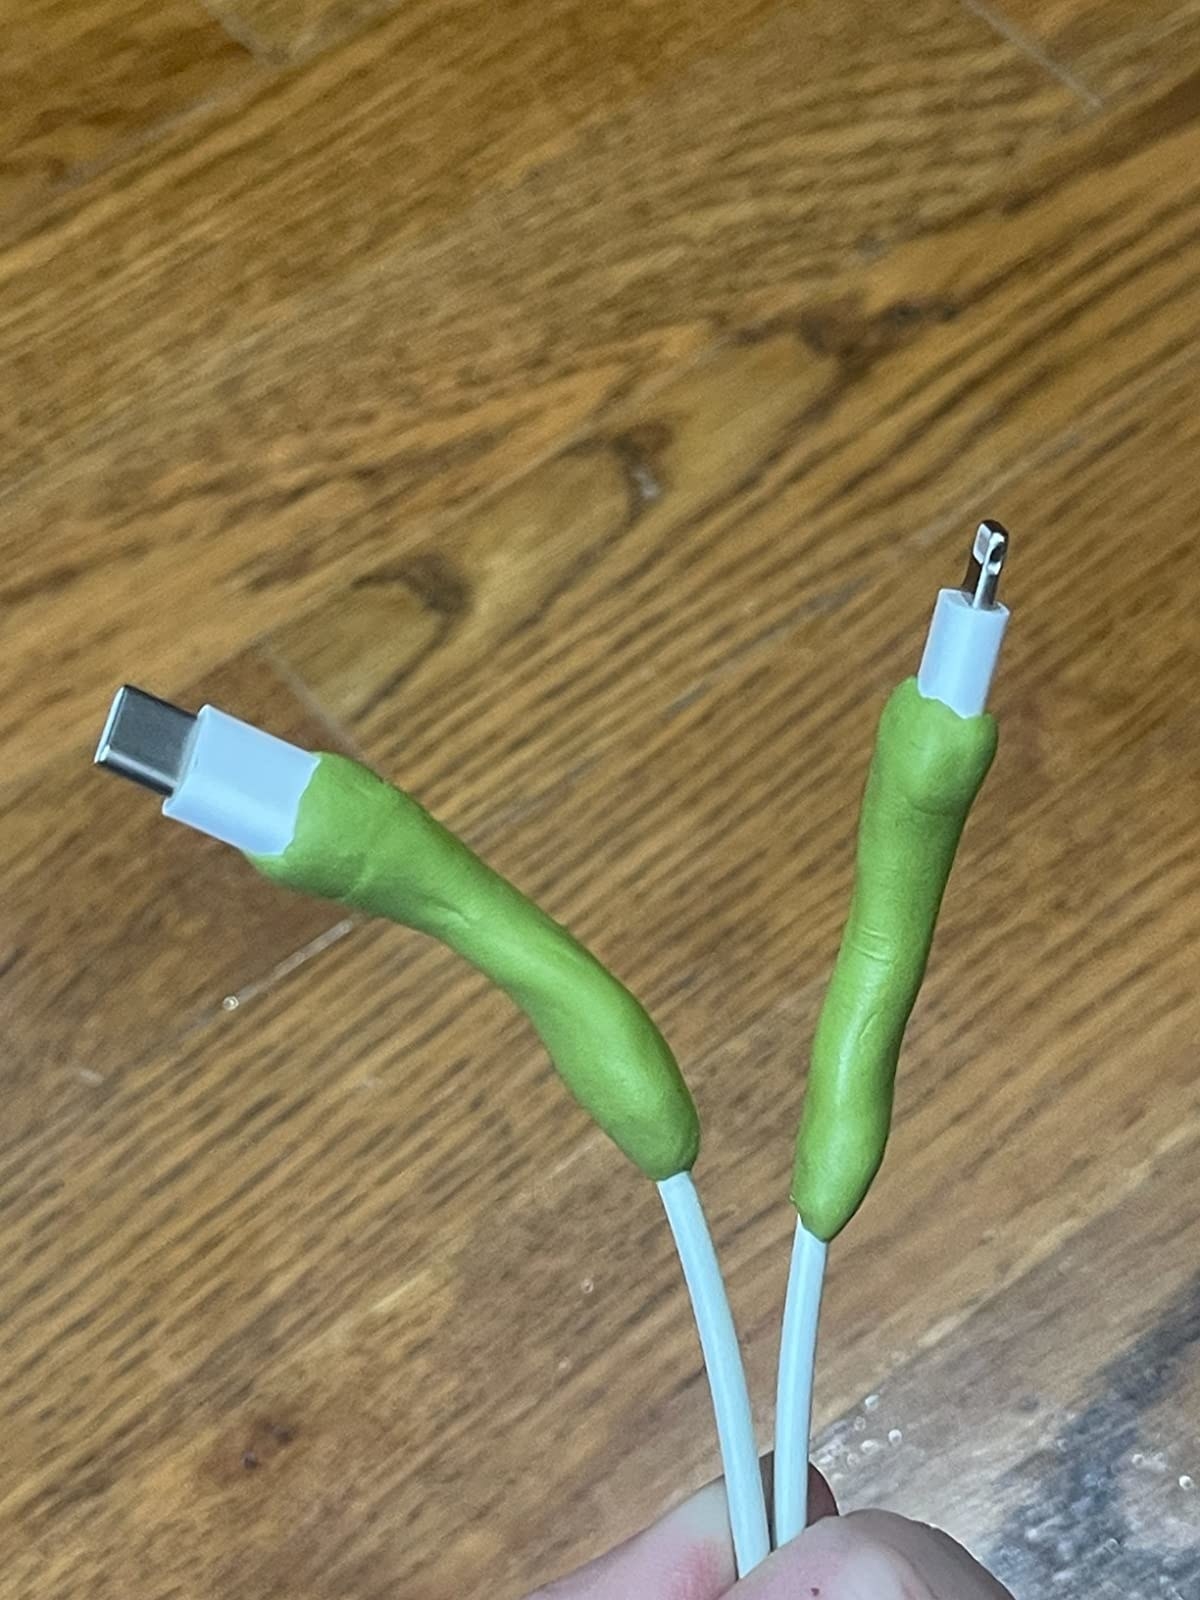 reviewer holding up two cords with green moldable glue on the ends